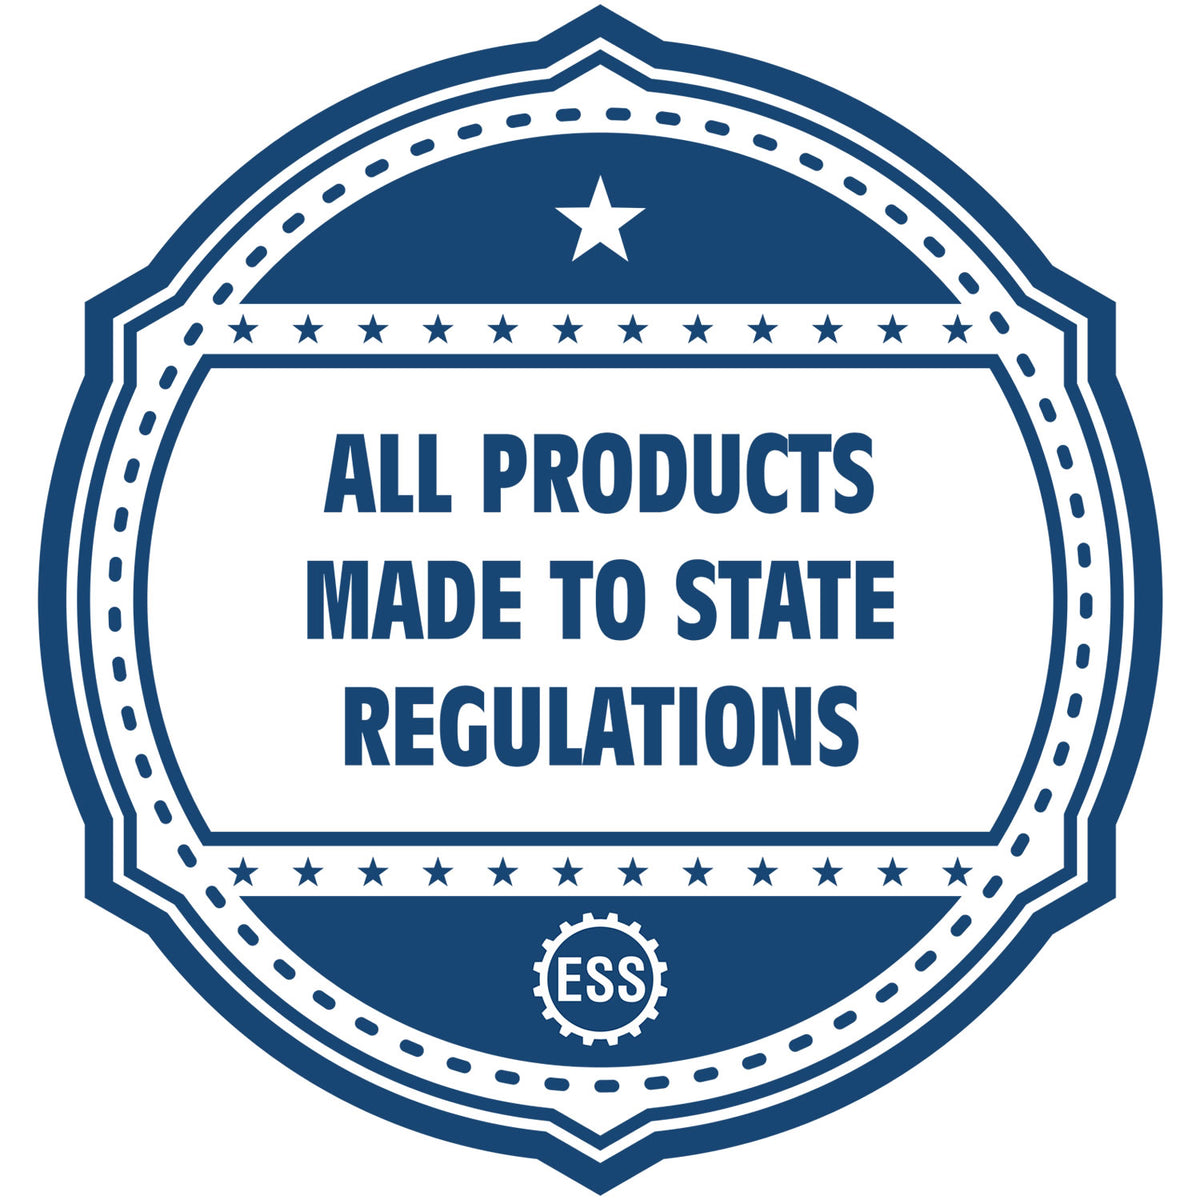 An icon or badge element for the Slim Pre-Inked Utah Professional Engineer Seal Stamp showing that this product is made in compliance with state regulations.